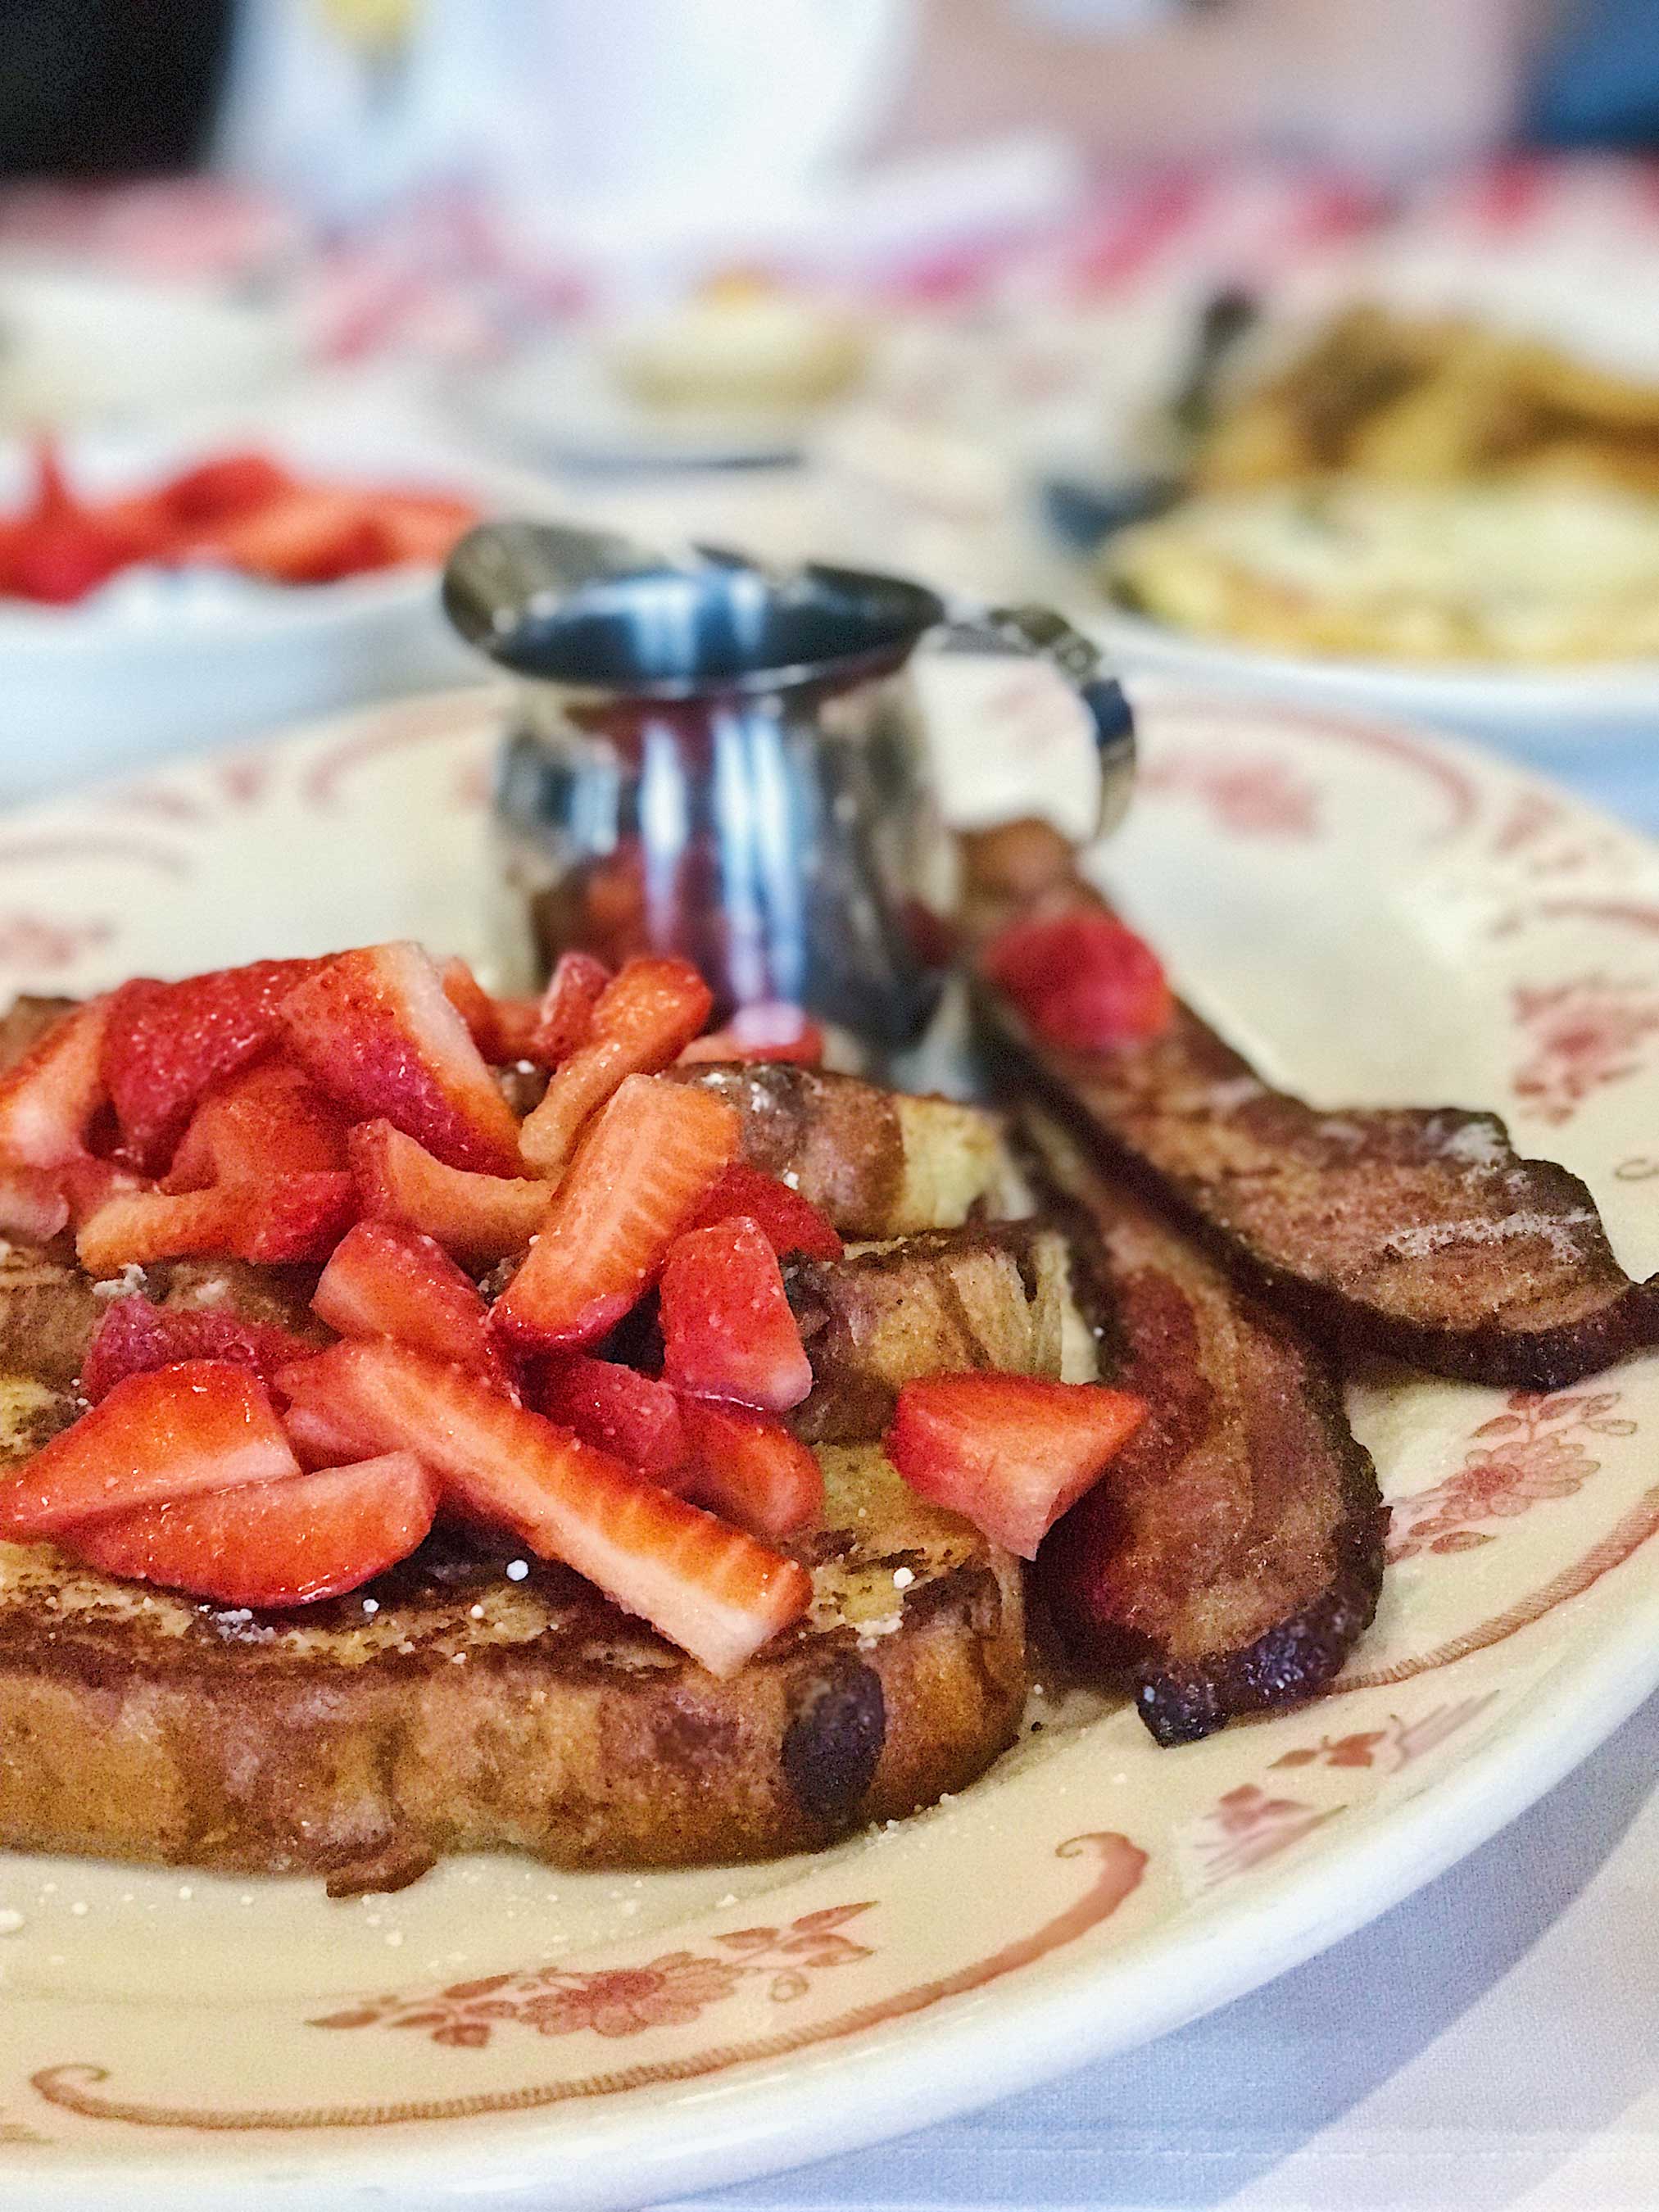 Crème Brûlée French Toast made with cranberry raisin focaccia and served with maple syrup and fresh strawberries  Credit: Chase White